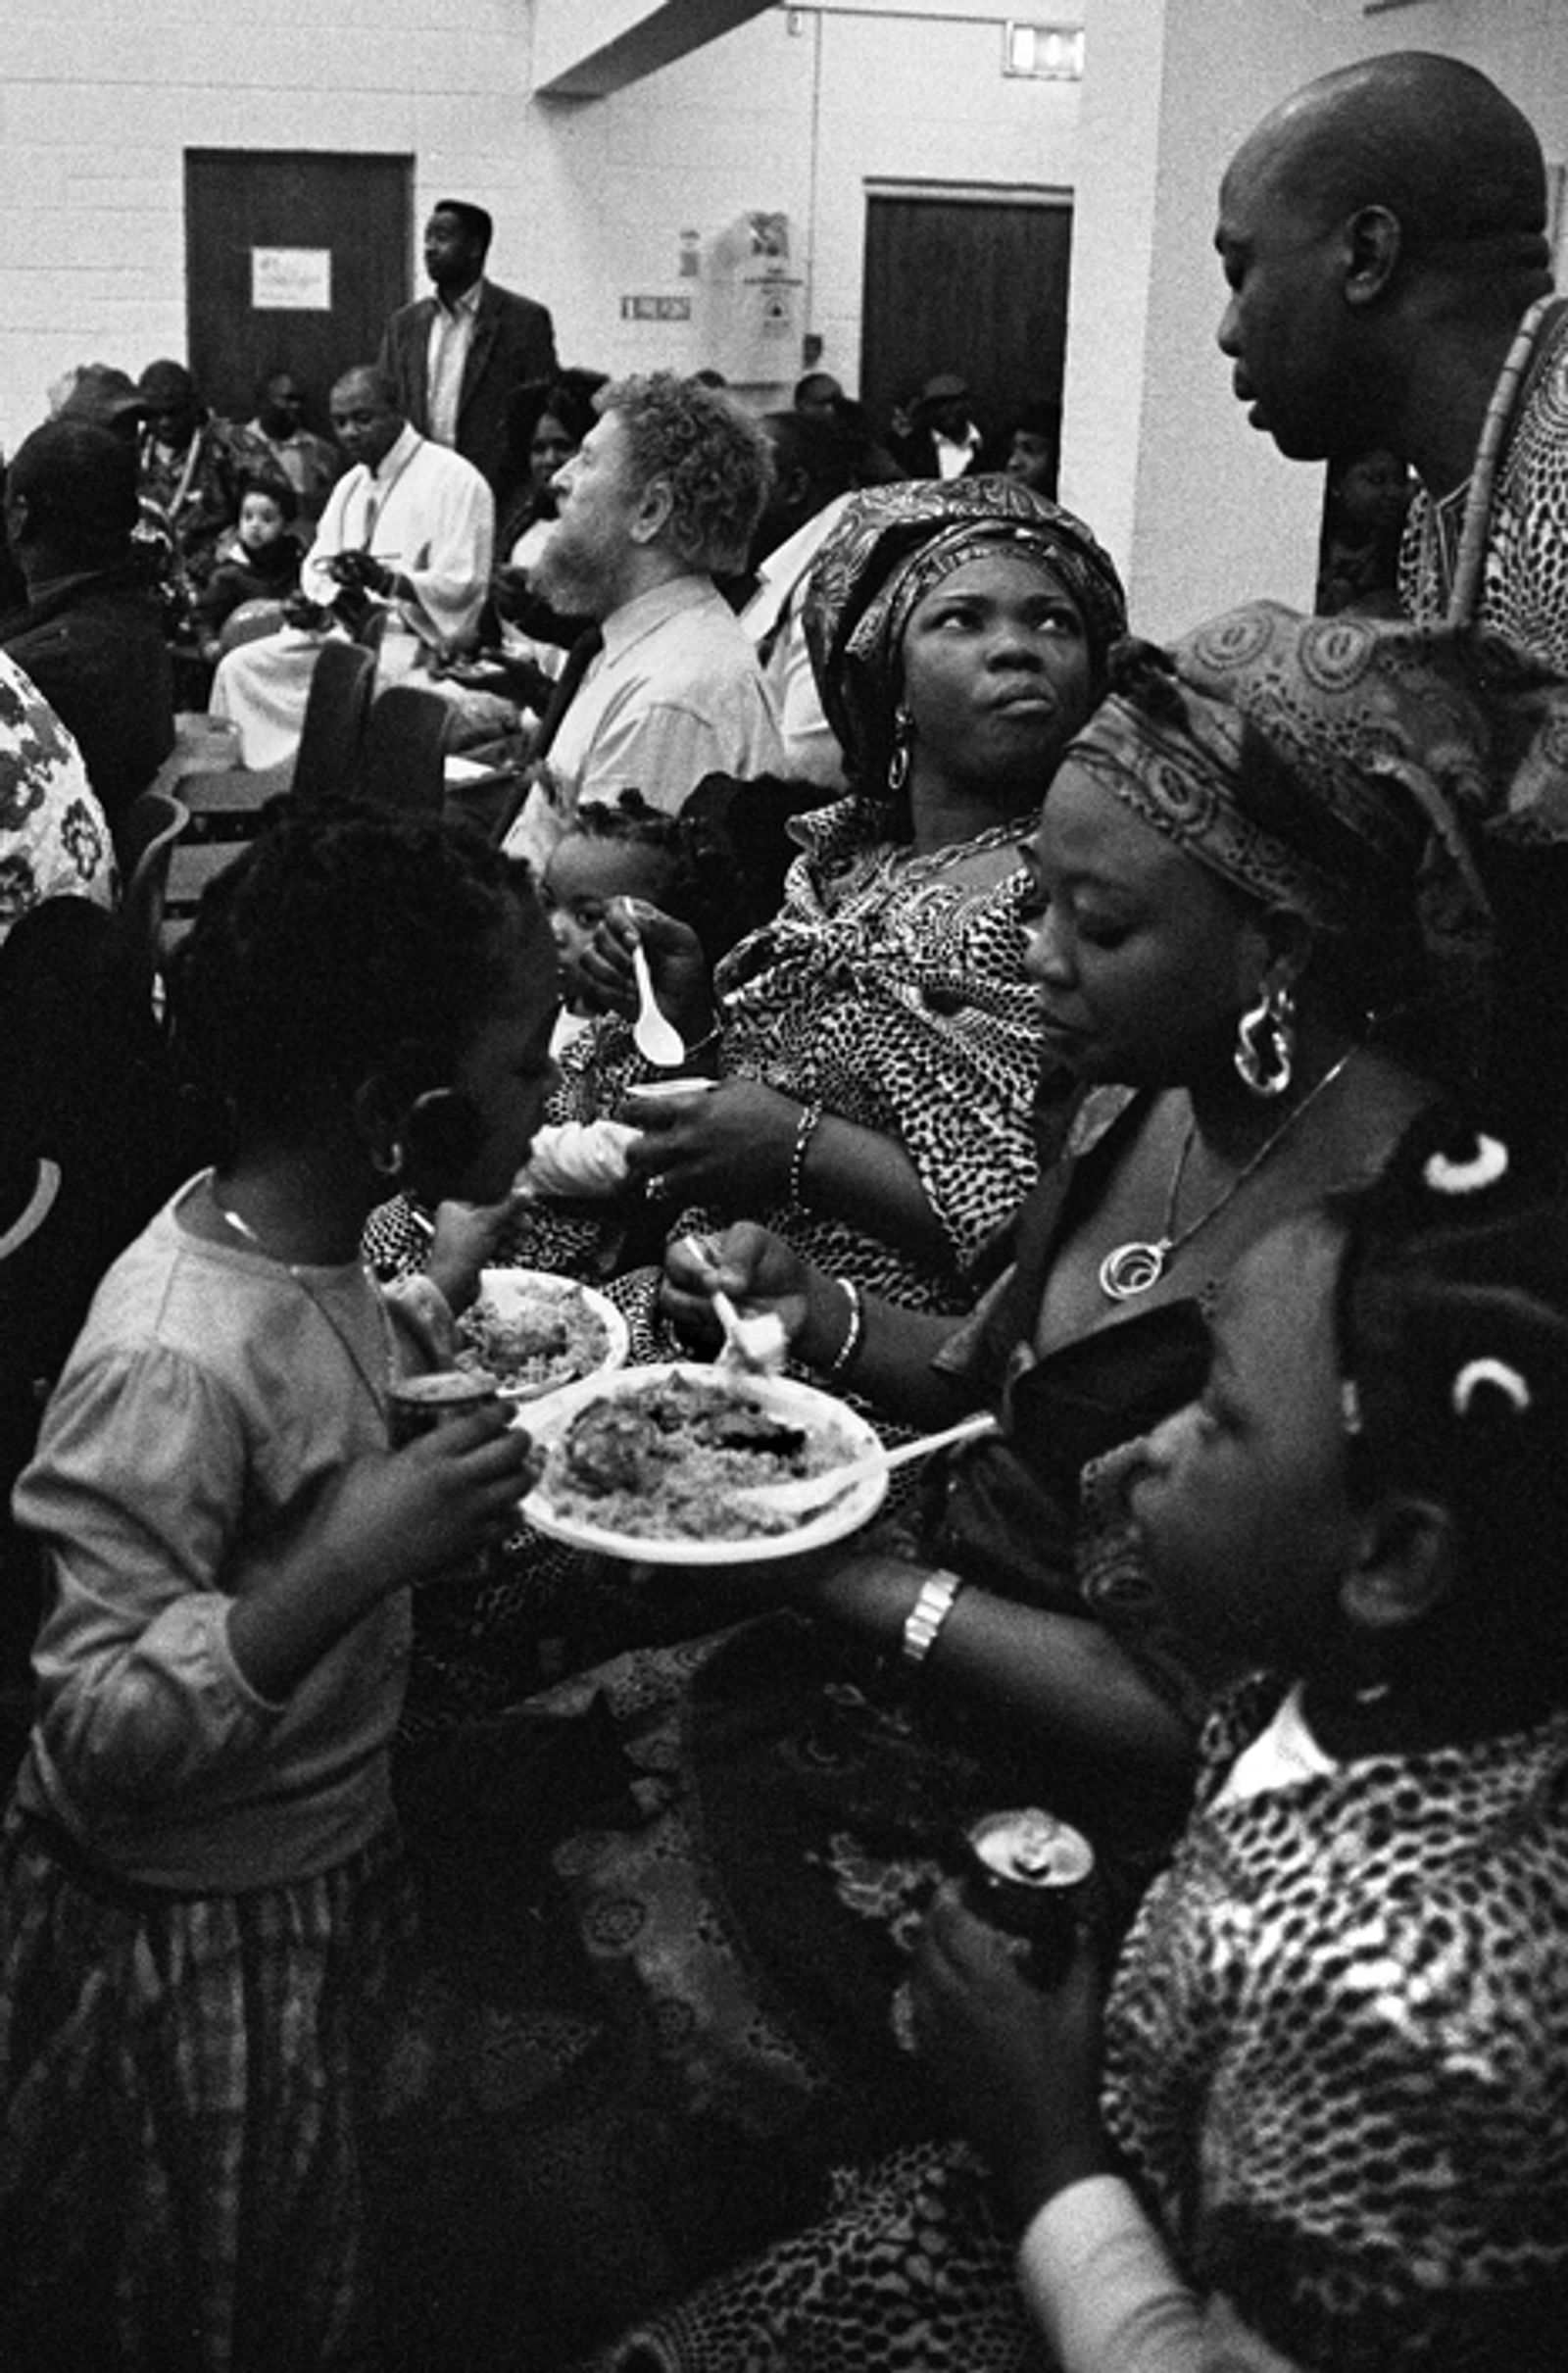 © Stephen Boyle - A Bini Nigerian family and relatives at annual celebrations in Tallaght, January, 2010.